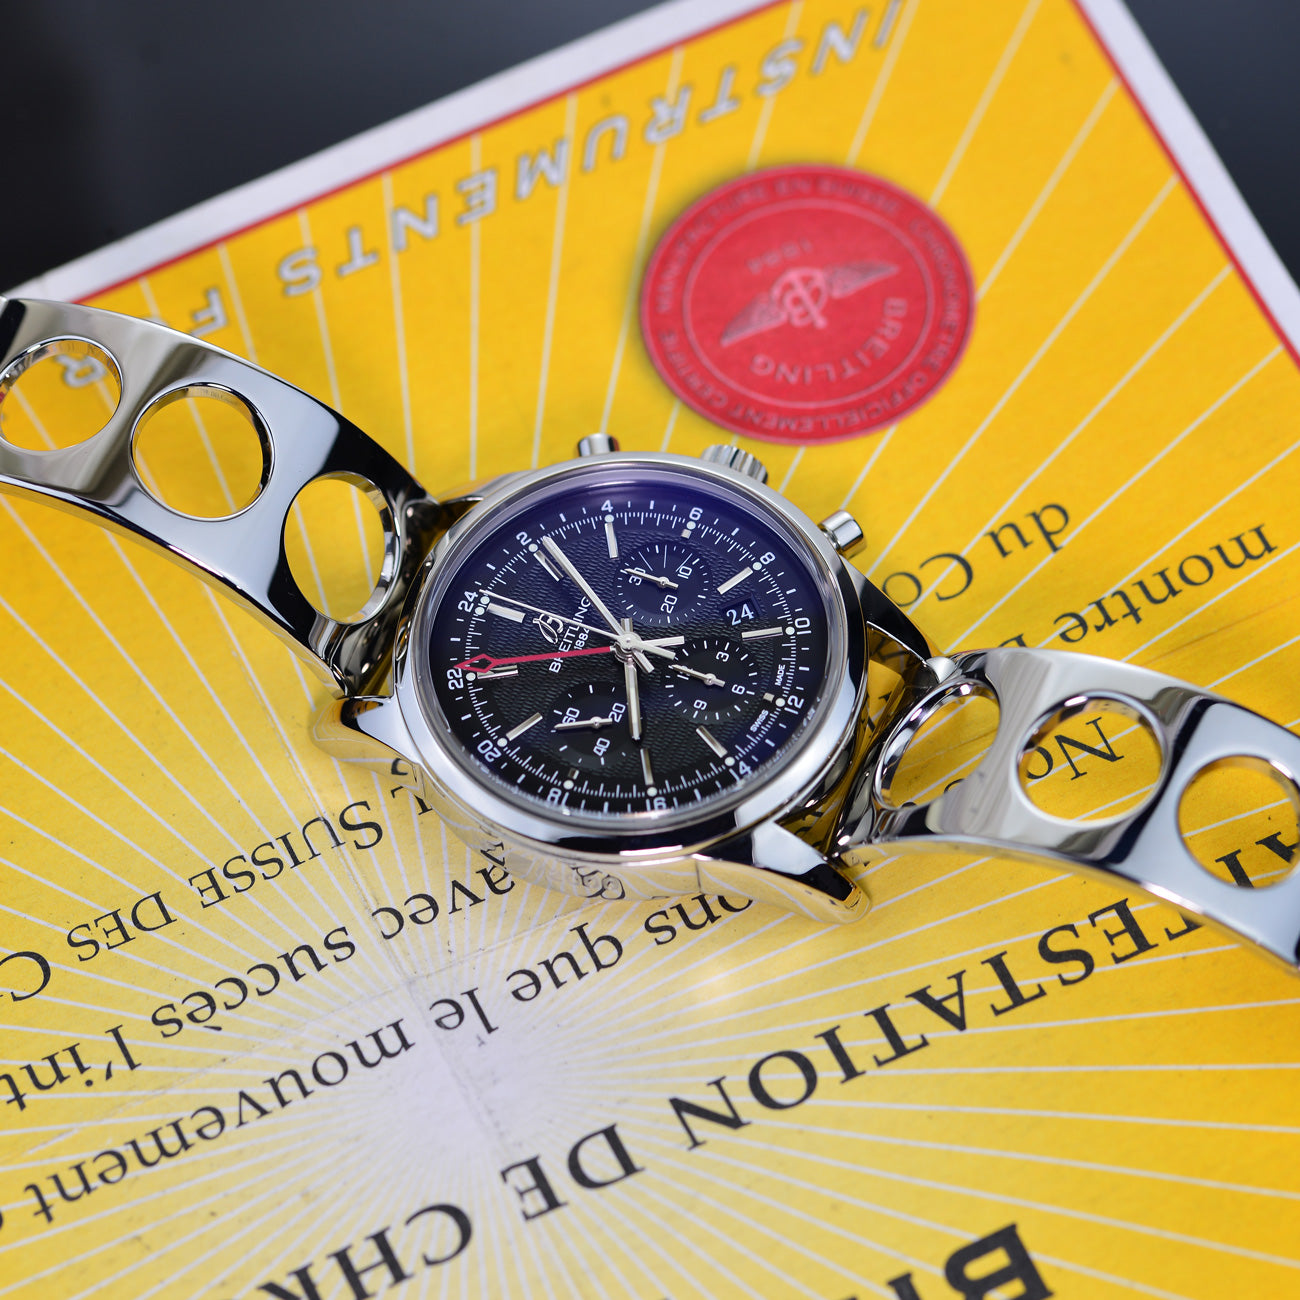 Breitling Transocean chronograph GMT limited edition for Rs